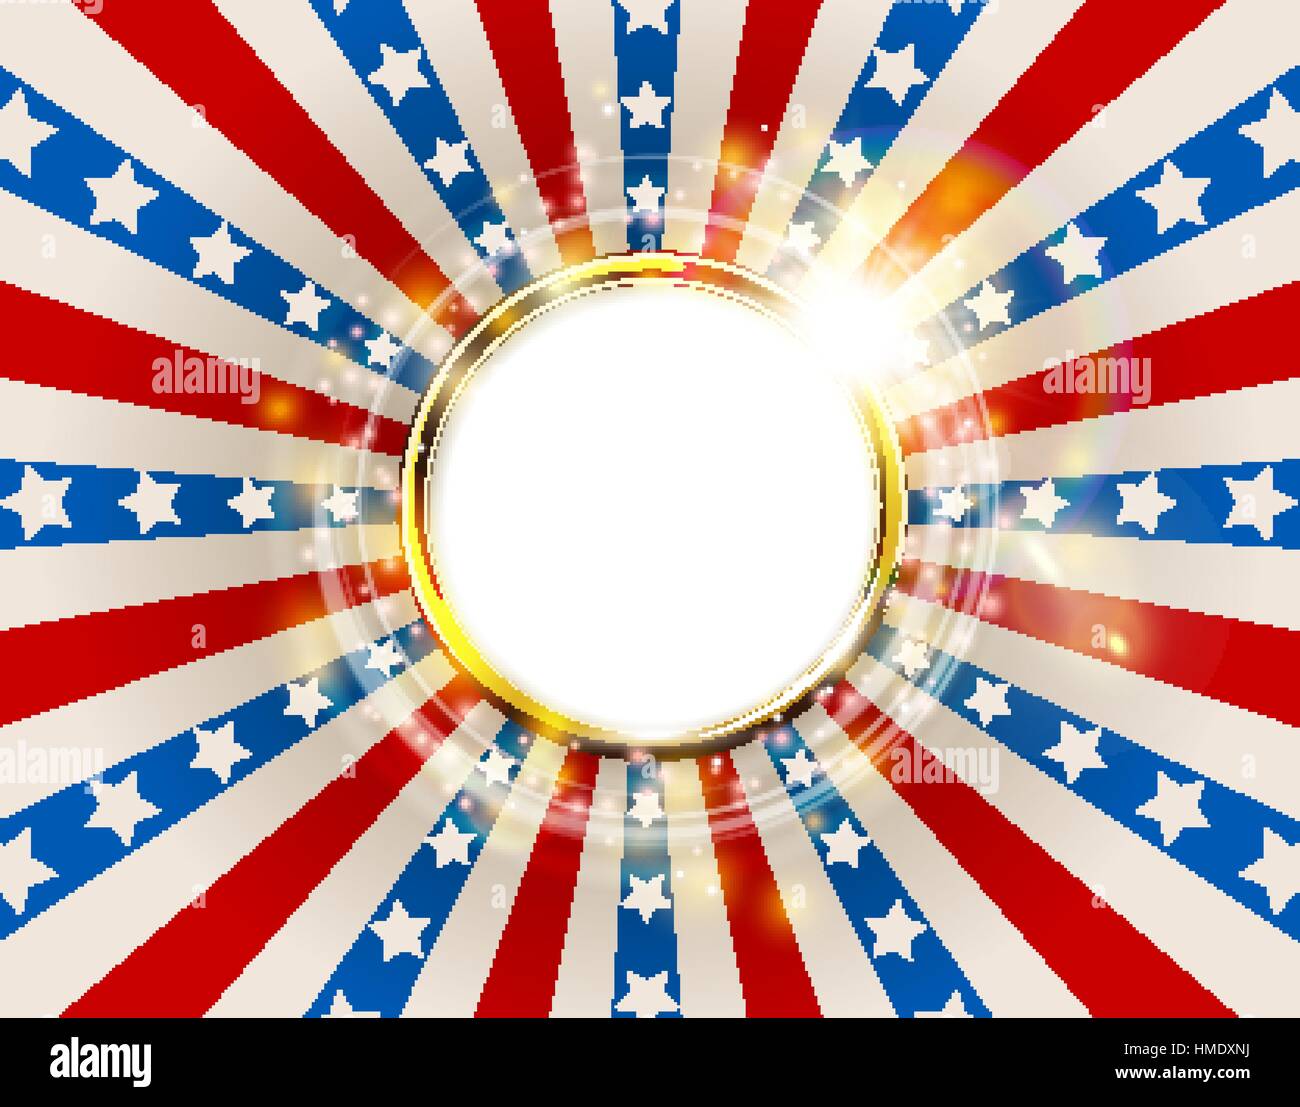 Patriotic background United States of America with sparks. USA flag color round frame. American Memorial Day or Independence Day golden ring concept Stock Vector